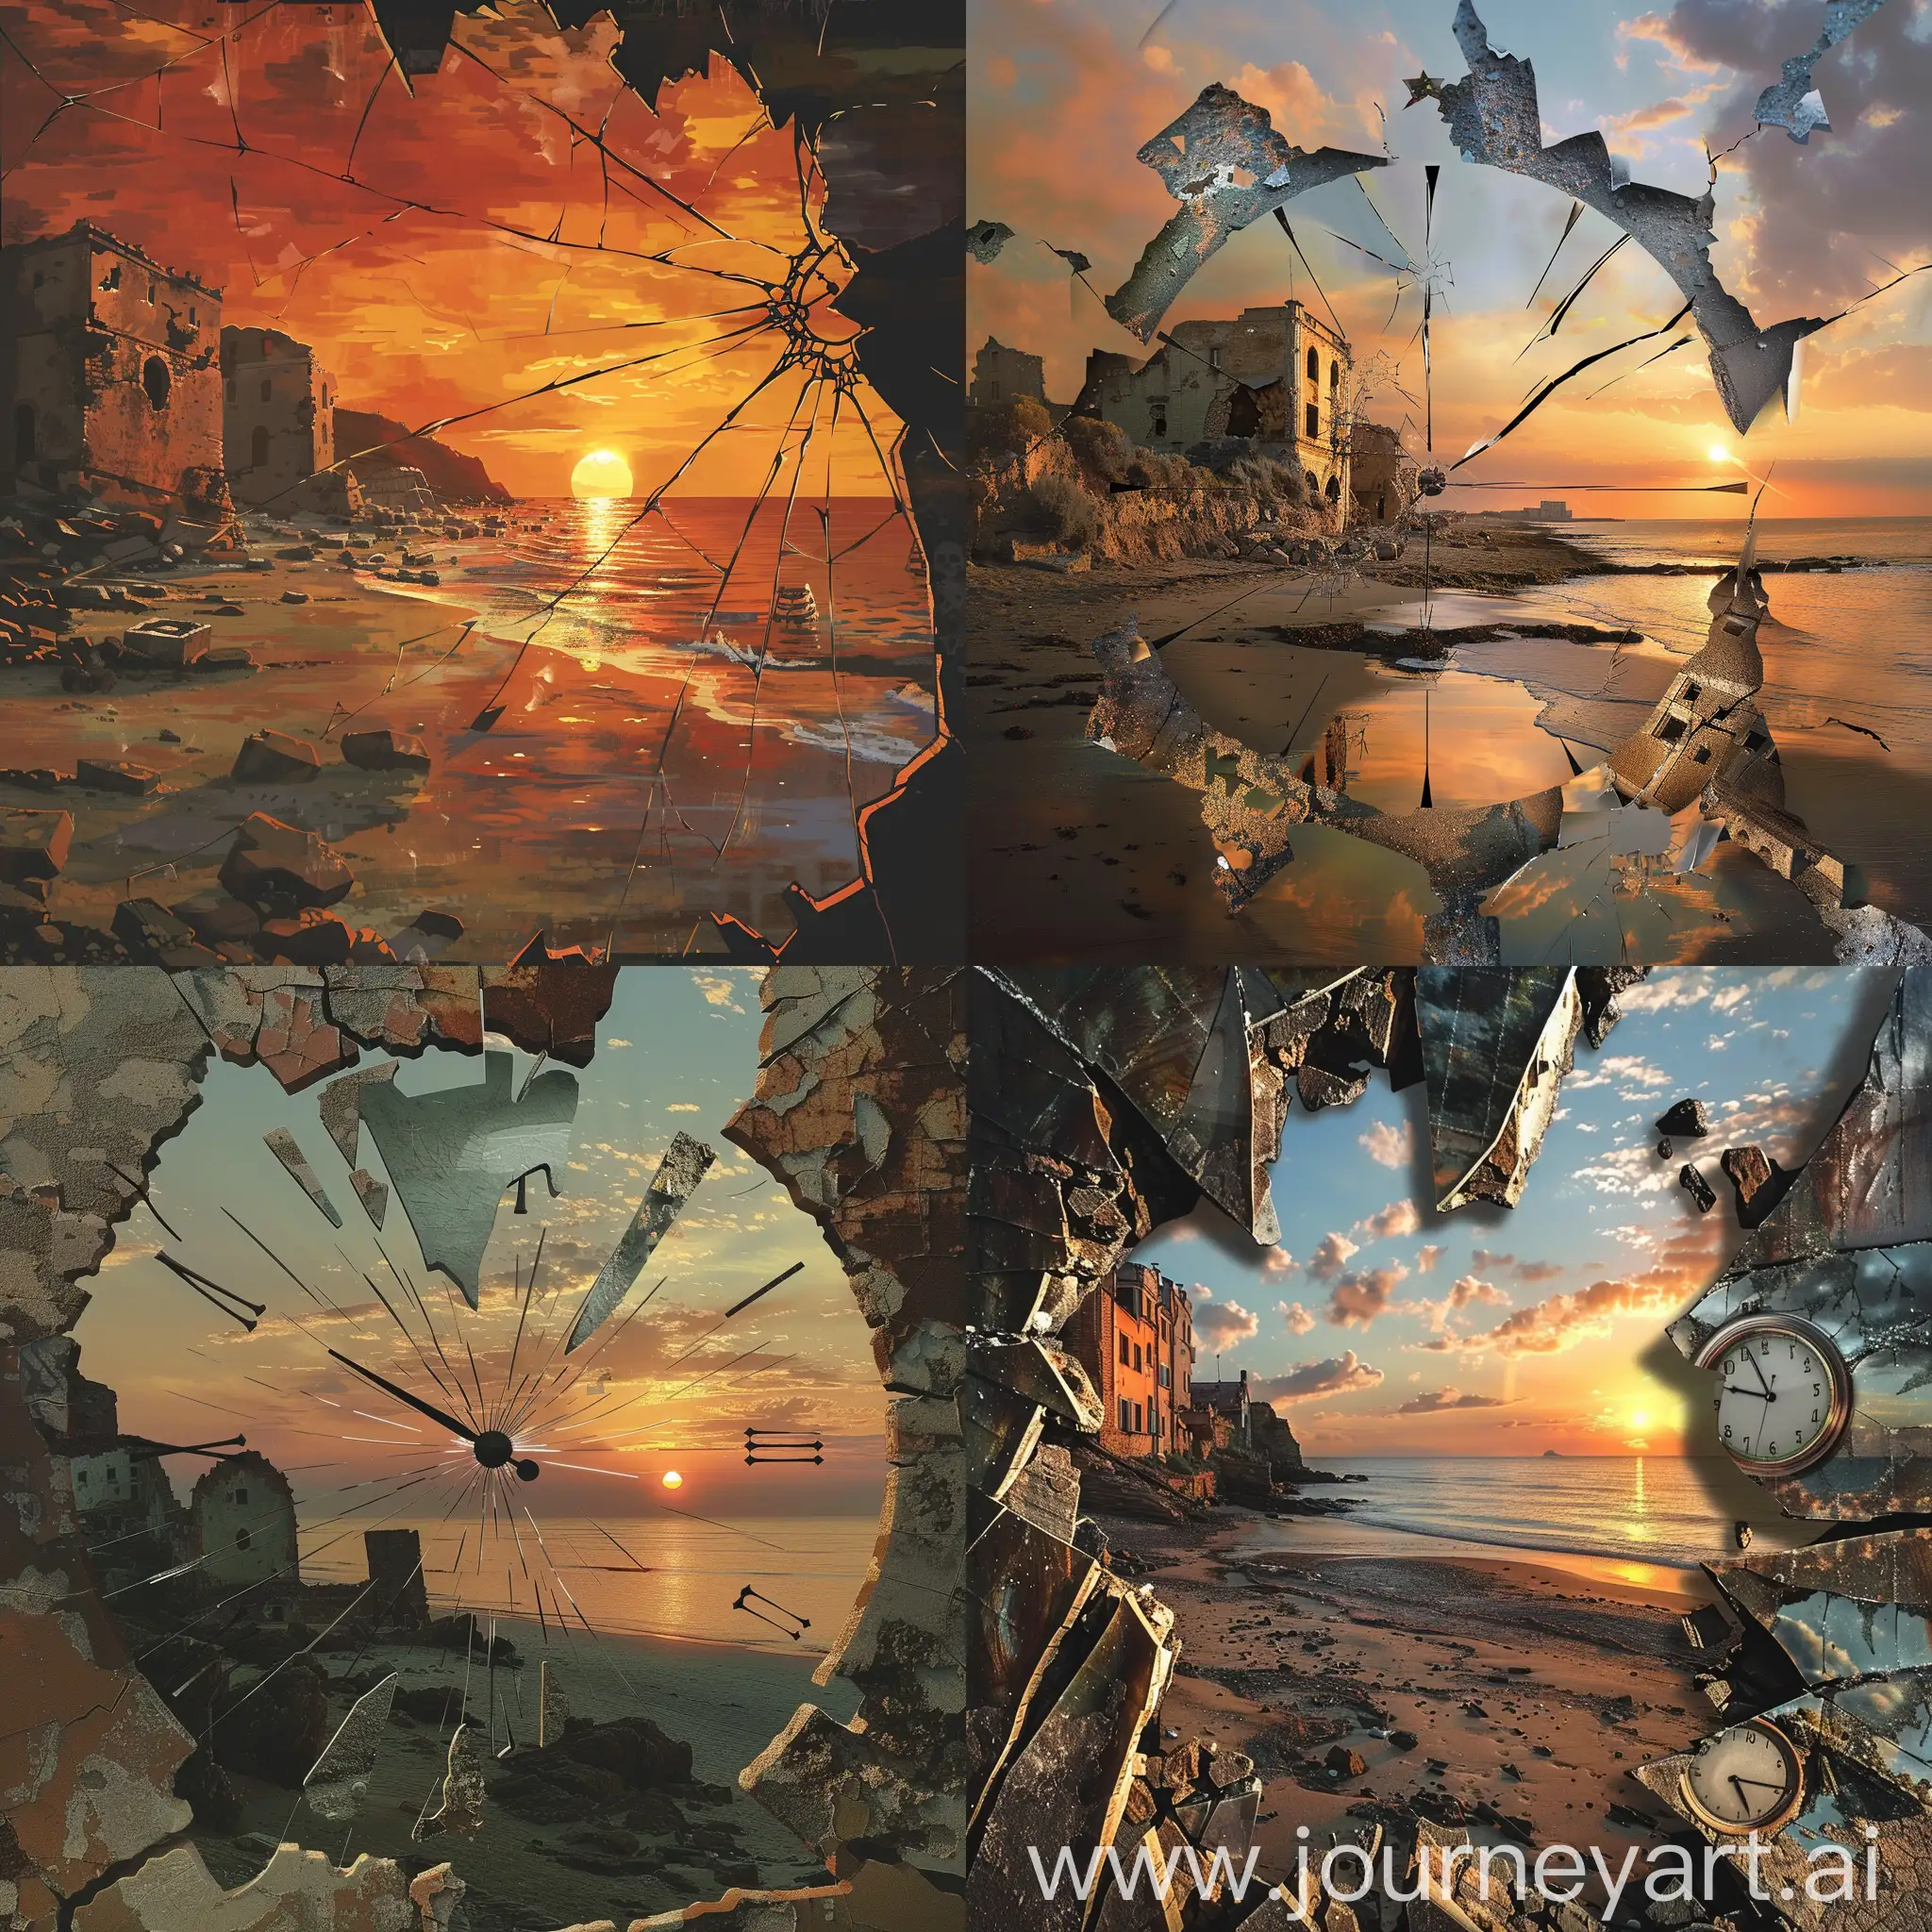  In the style of a broken watch, against the background of sunset, a beach with crumbling buildings.